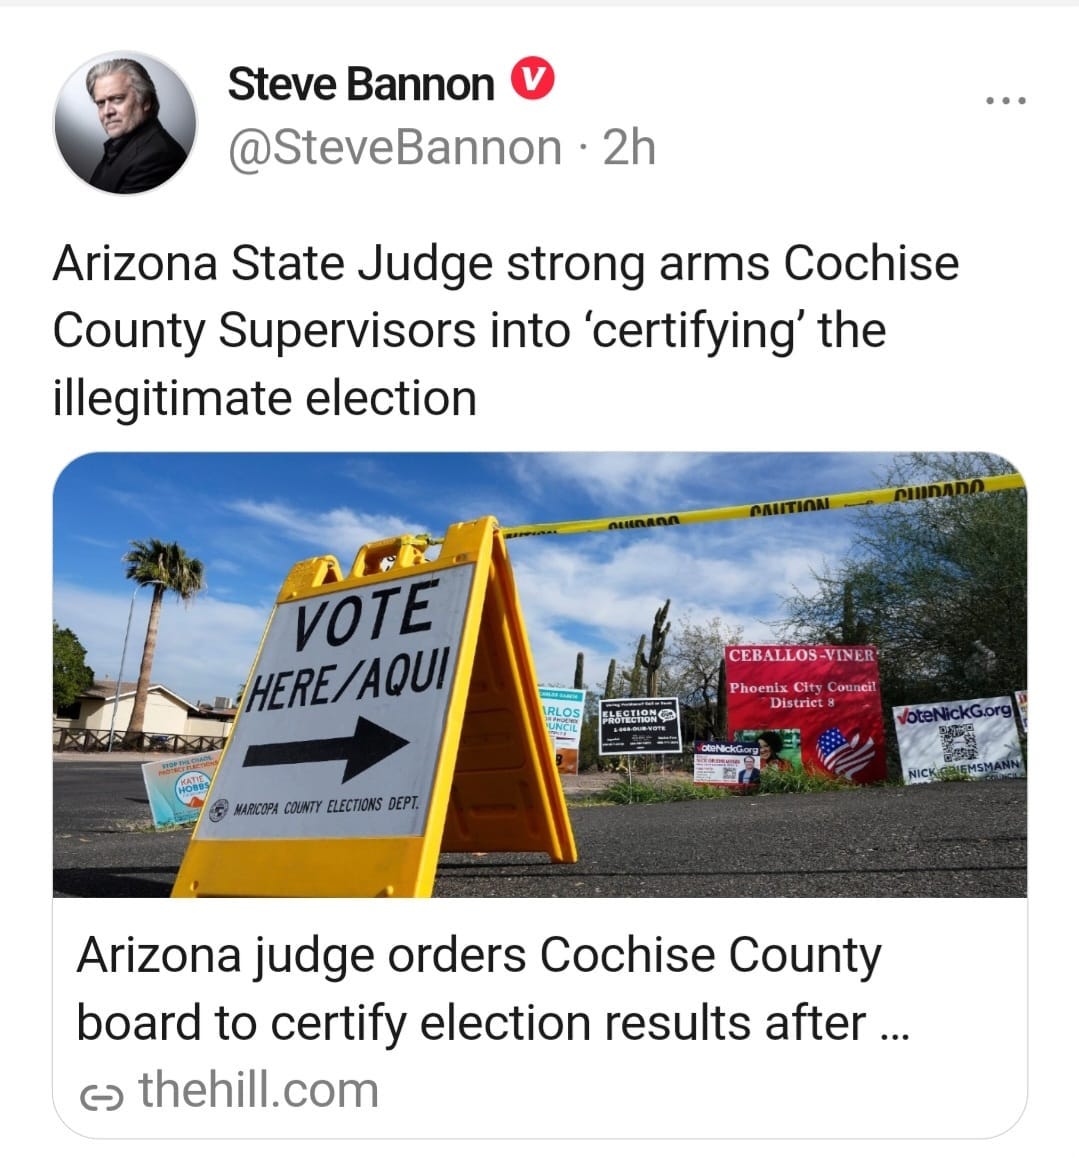 May be an image of 1 person, outdoors and text that says 'Steve Bannon @SteveBannon 2h Arizona State Judge strong arms Cochise County Supervisors into 'certifying' the illegitimate election VOTE HERE /AQUI CEBALLOS-VINER ouncil MARCOPA COUNTY ELECTIONS DEPT. Arizona judge orders Cochise County board to certify election results after... ૯ thehill.com'